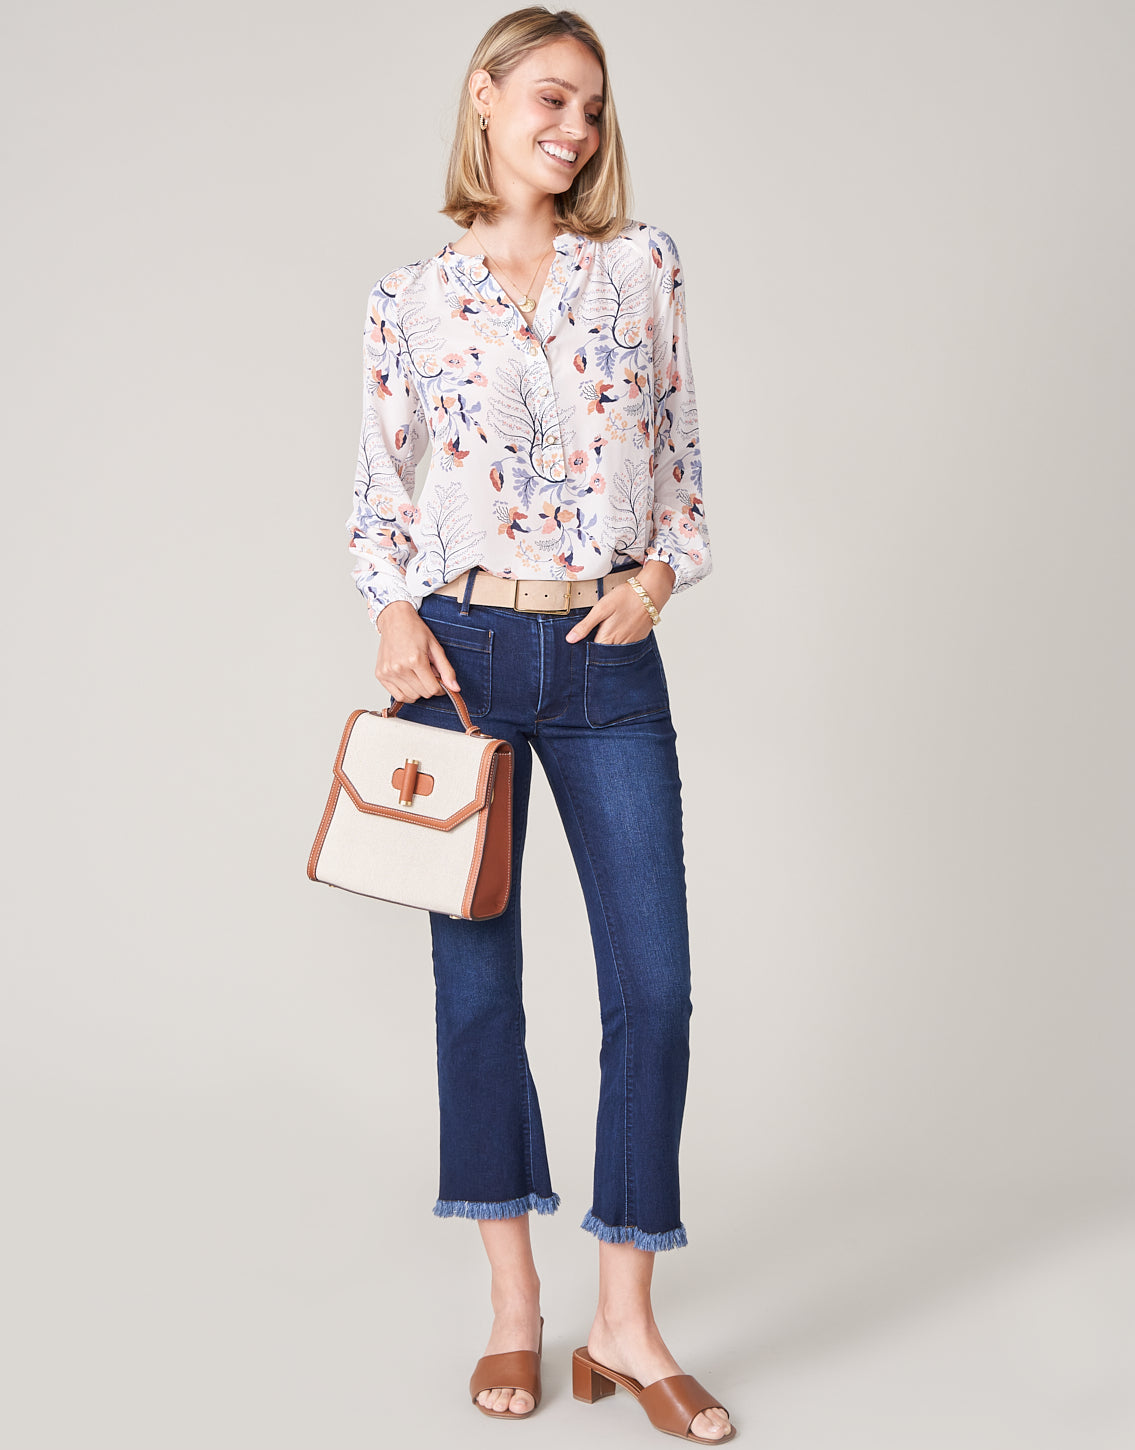 Spartina 449 Spring Summer 2021 Catalog by Just Got 2 Have It! - Issuu